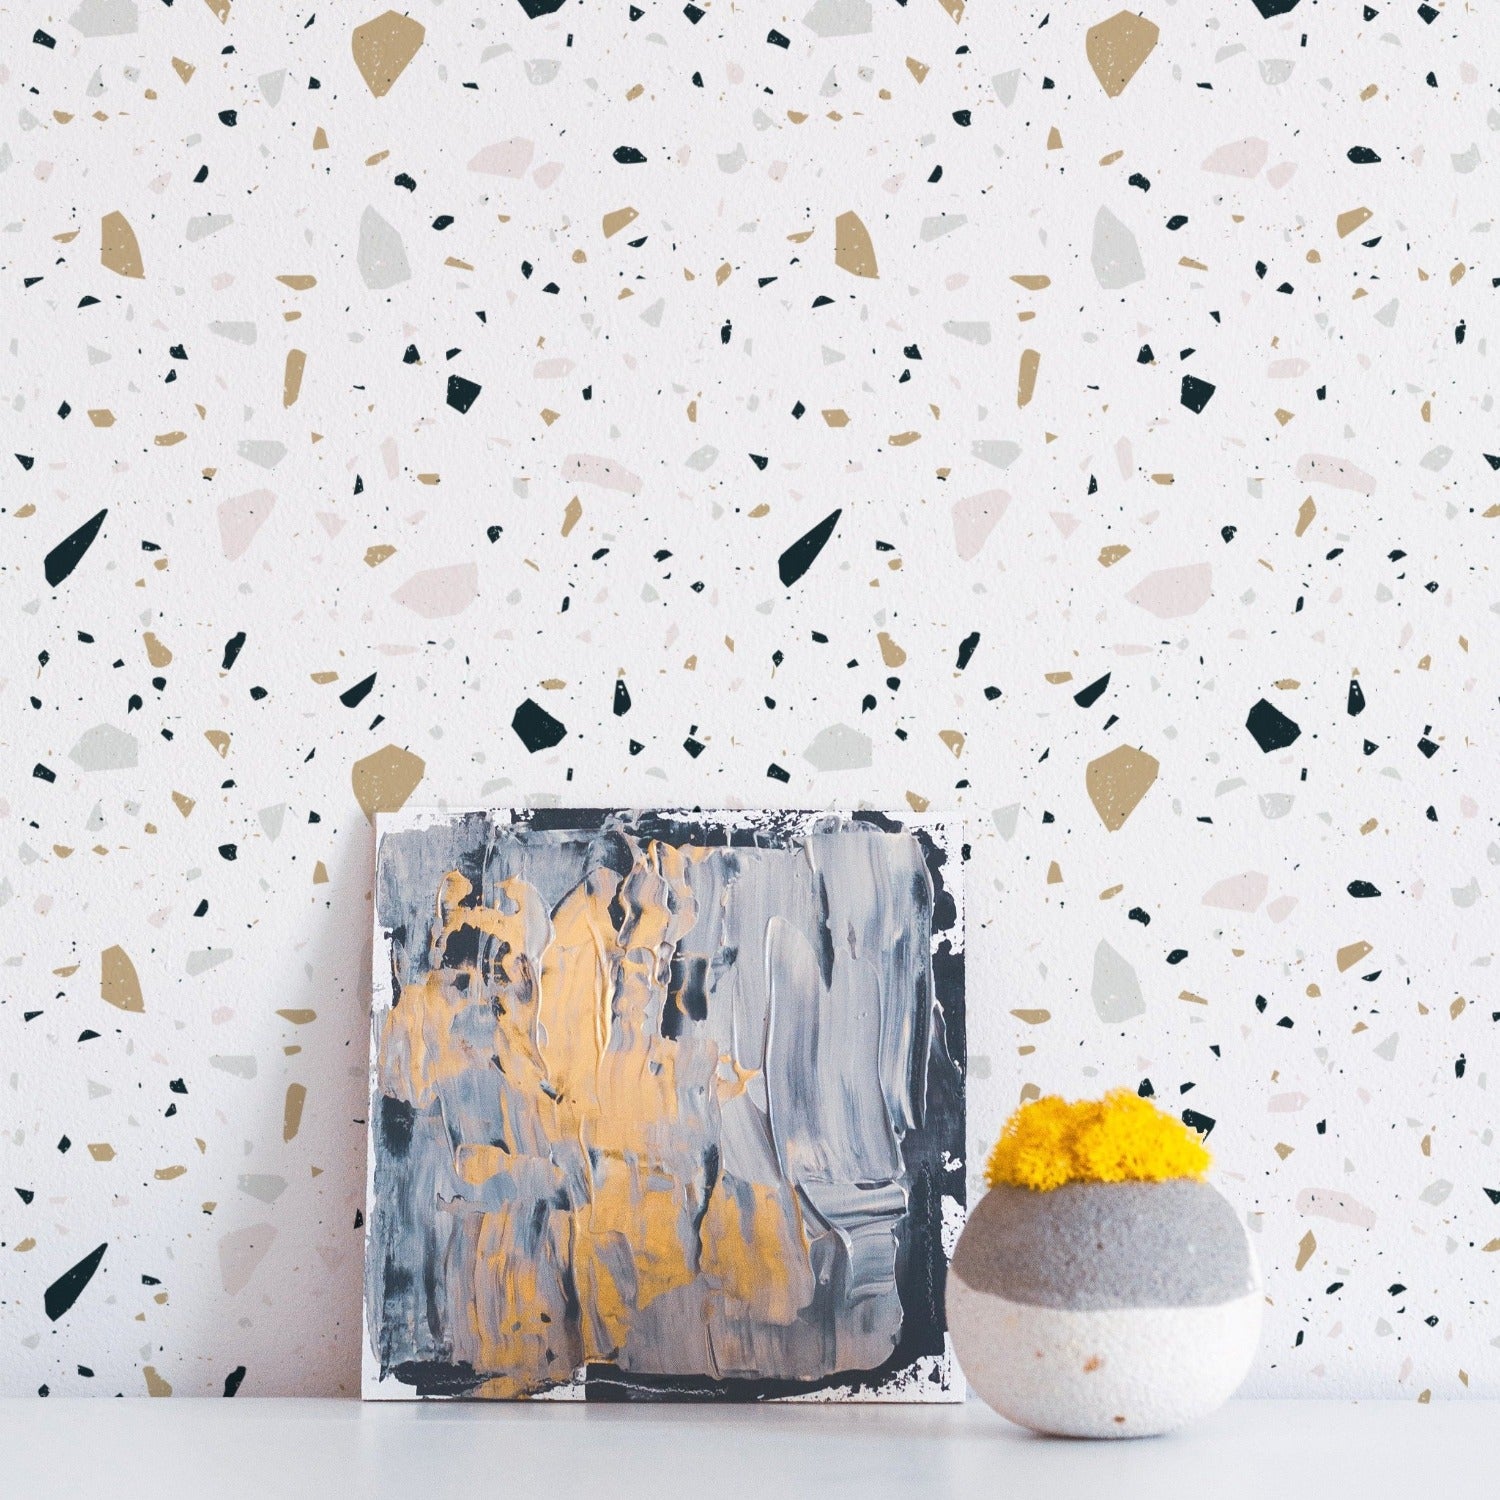 Stone Terrazzo Wallpaper in a stylish interior, complementing a modern painting and a textured vase with vibrant yellow flowers, highlighting the wallpaper's versatility and contemporary appeal.